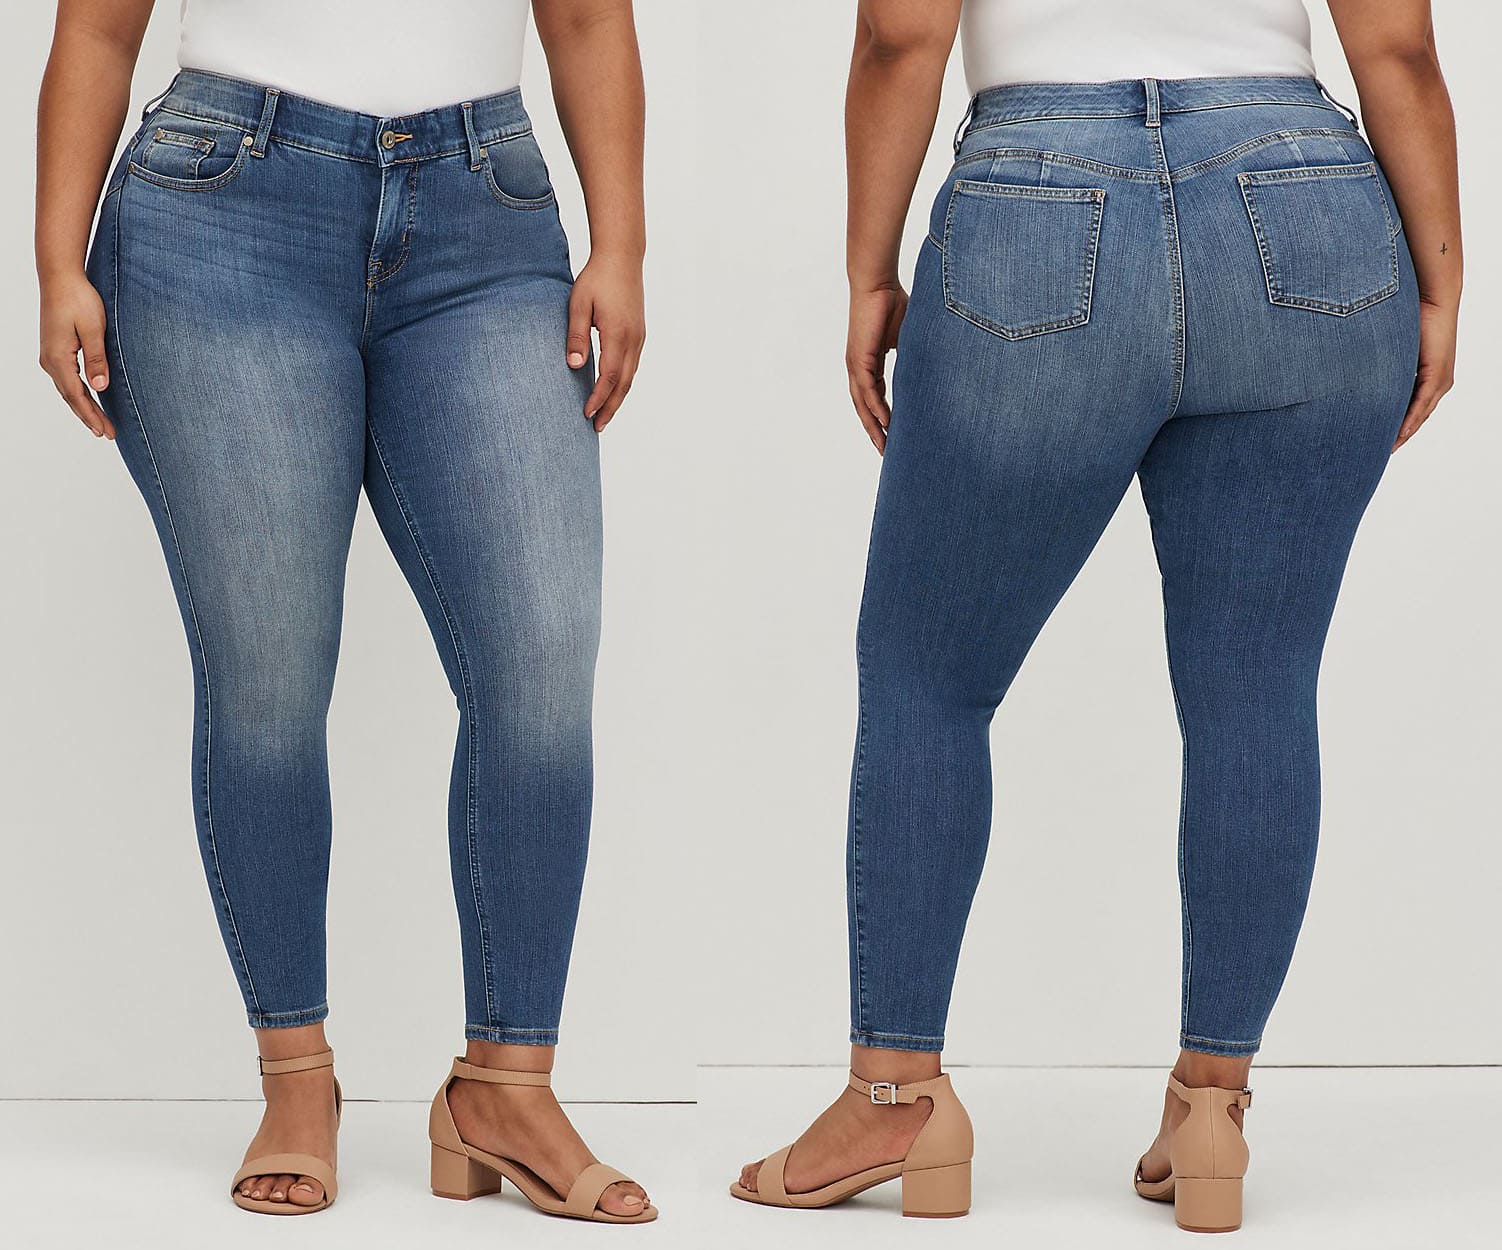 The Bombshell jeans are a pair of comfortable high-waist super skinny jeans that feature gap-proof elastic waistband for all-day comfort